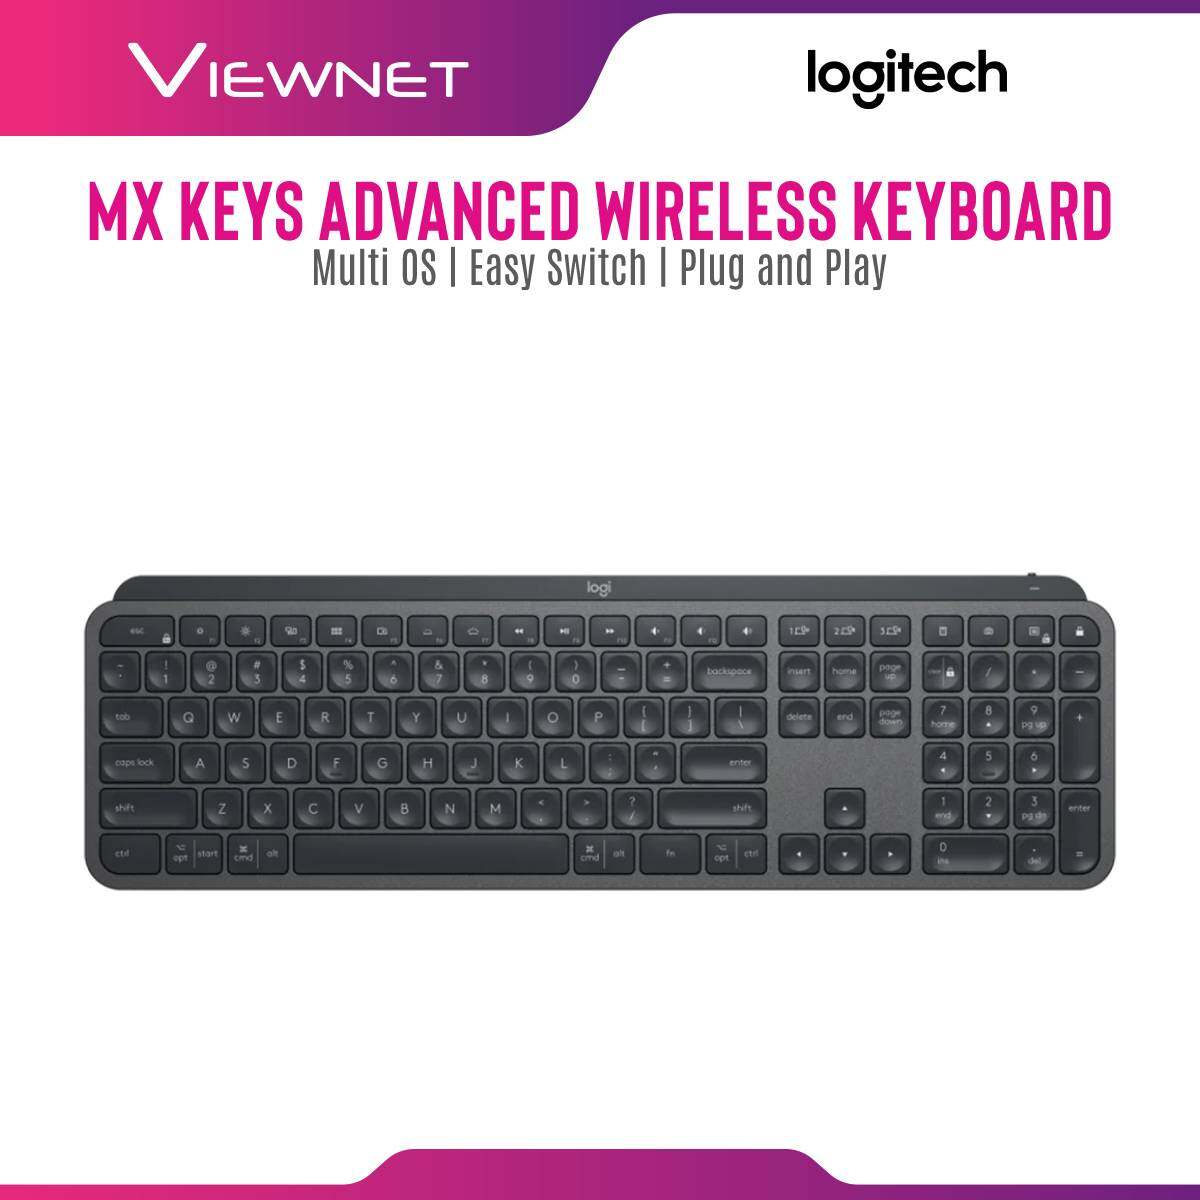 Logitech MX Keys Advanced Wireless Keyboard with Multi OS, Easy-Switch Enabled, Logitech Options Software Support, USB Receiver or Wireless Connection, USB-C Rechargeable, Up To 5 Months Battery